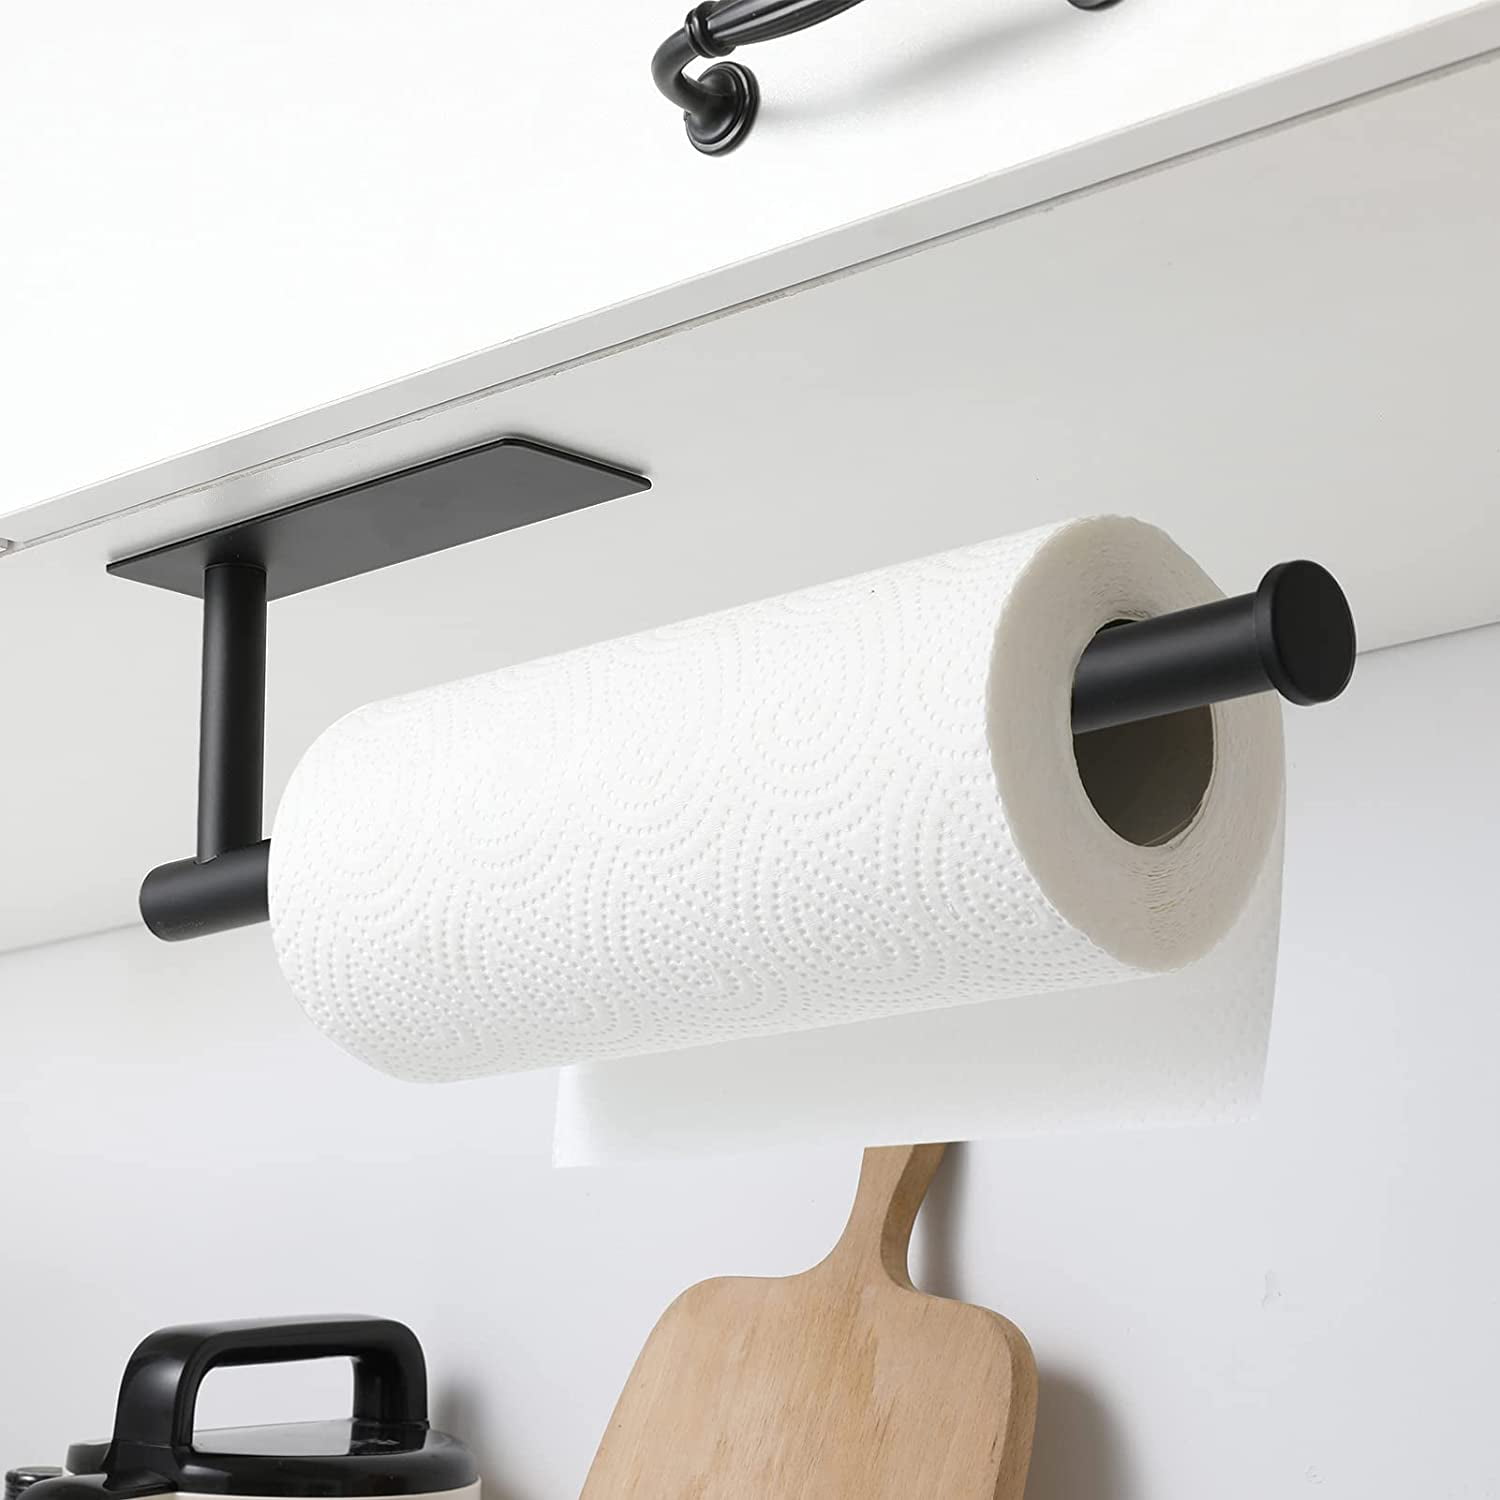 Self Adhesive Paper Towel Holder Under Kitchen Cabinet, Paper Towel Rack  Stick On Wall, Matte Black Paper Holder Mounted Vertical Or Horizontal In  Sc